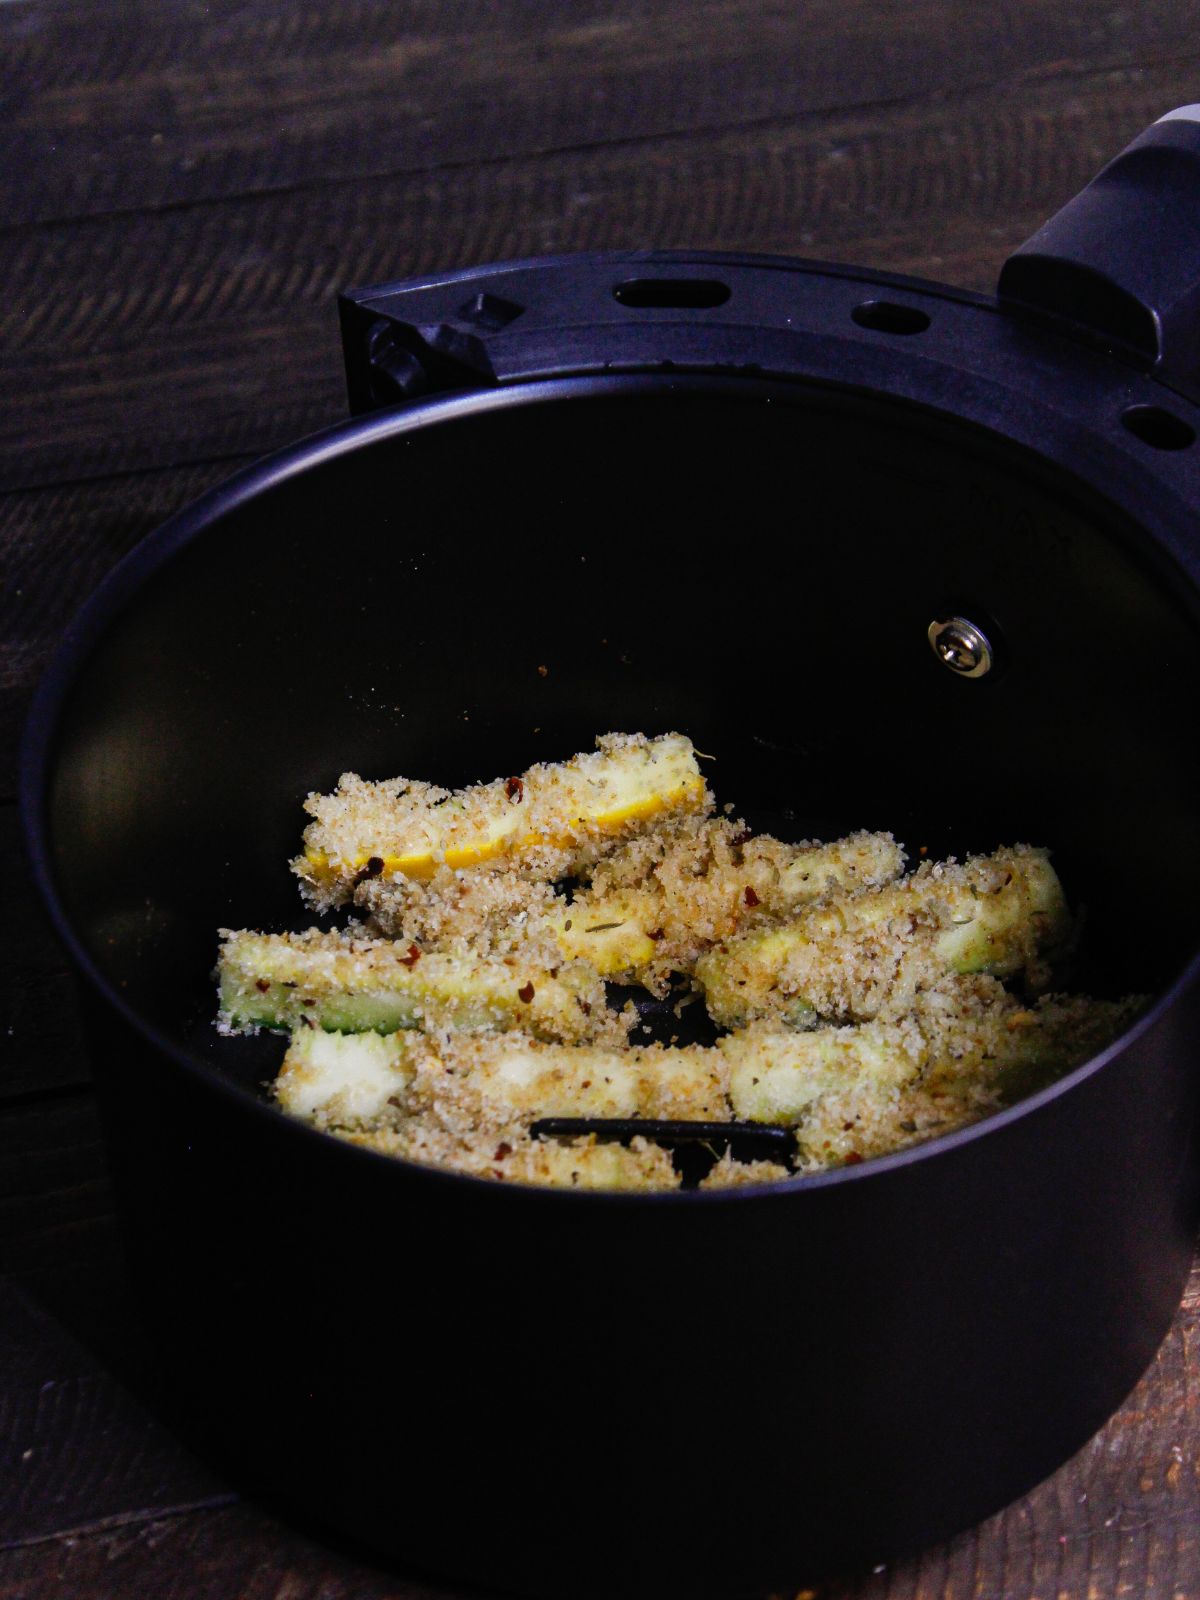 Transfer everything into air fryer basket